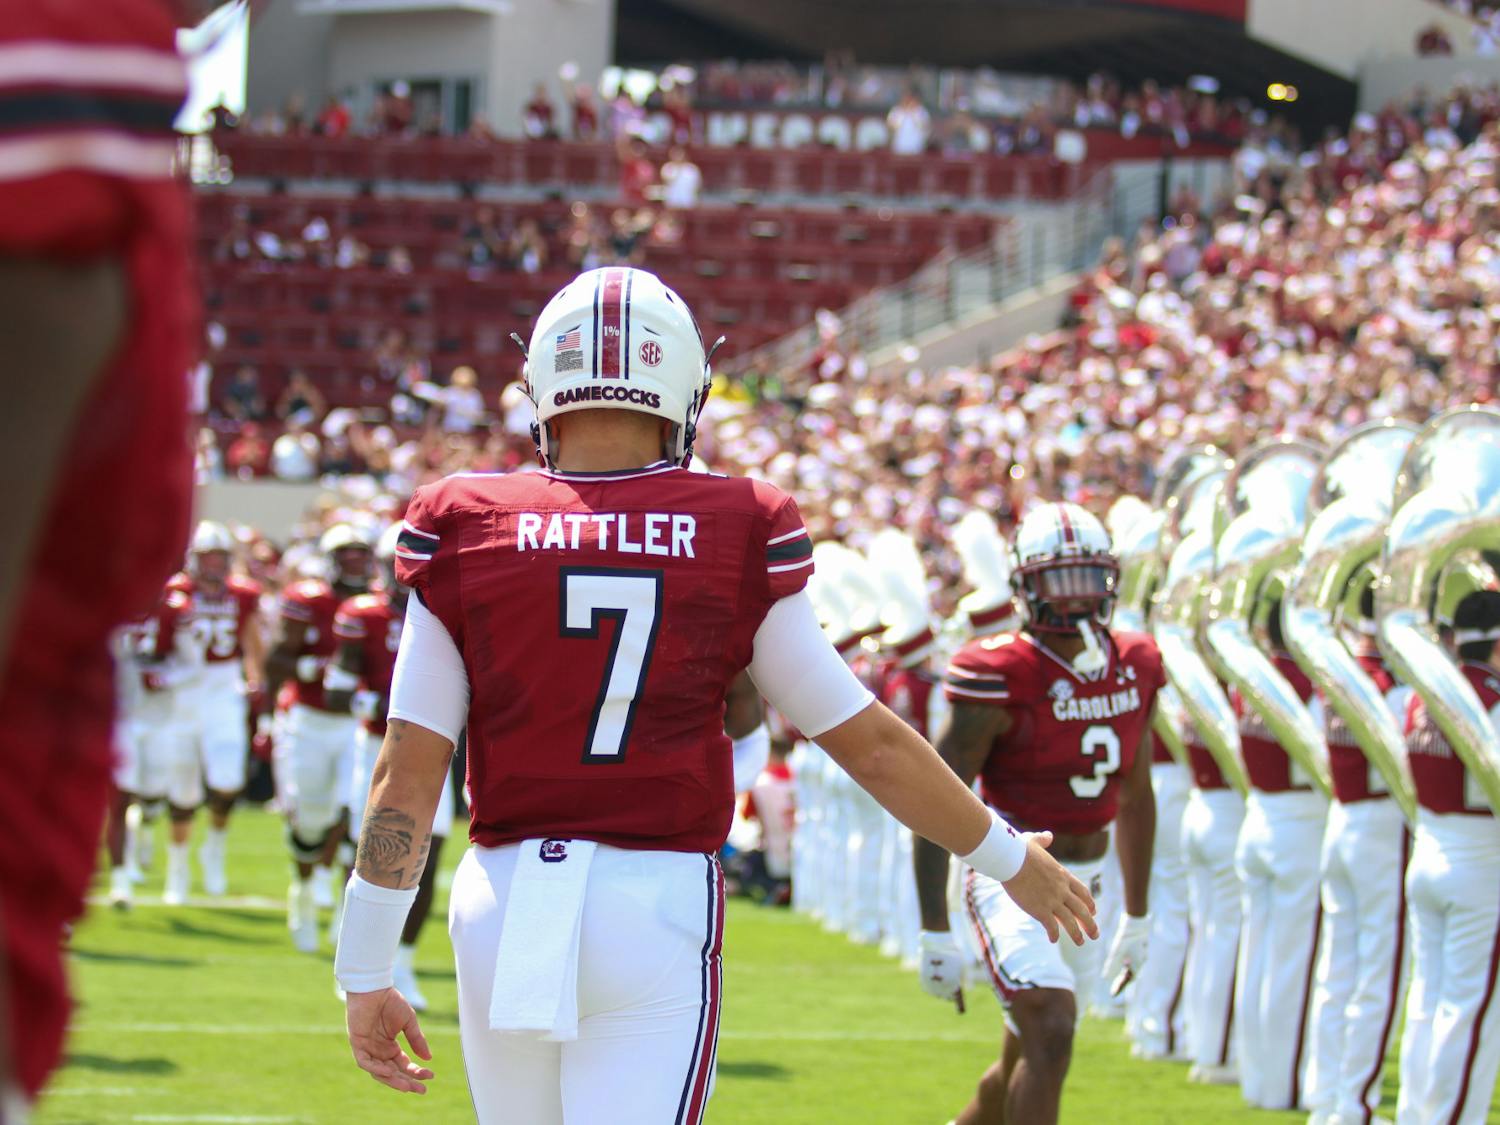 Spencer Rattler makes his way onto the field at the start of the Gamecock's highly anticipated game against the No. 1 Georgia Bulldogs on Sept. 17, 2022.